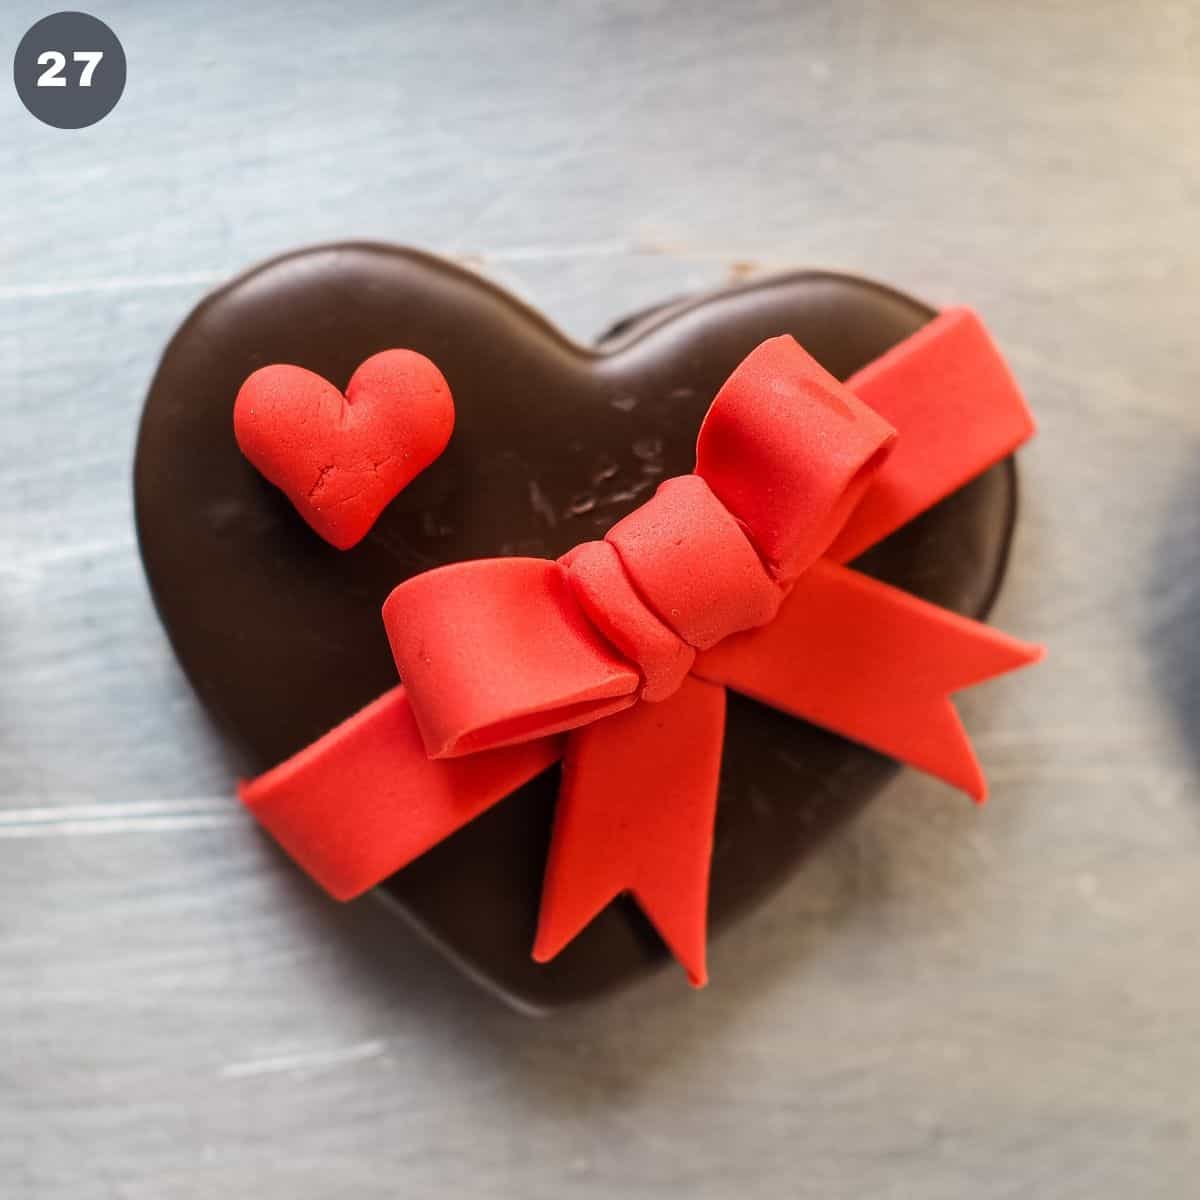 A chocolate cookie decorated with red fondant heart and bow.